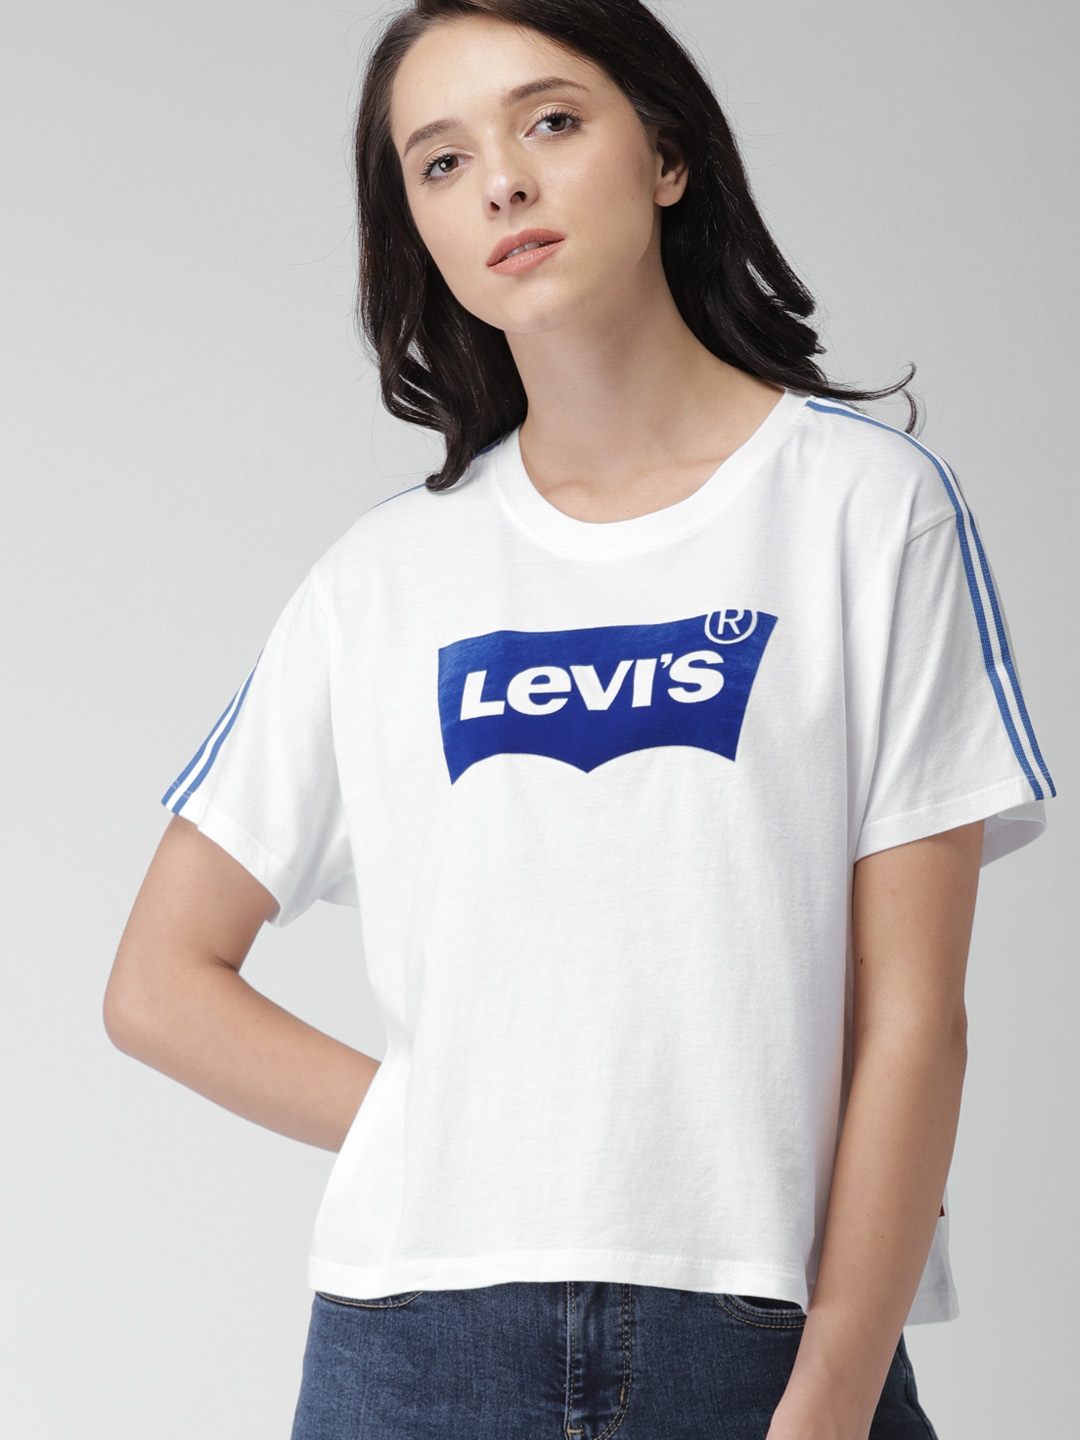 Buy Levis Women White Printed Round Neck Pure Cotton T Shirt 39389 0033 -  Tshirts for Women 6799397 | Myntra